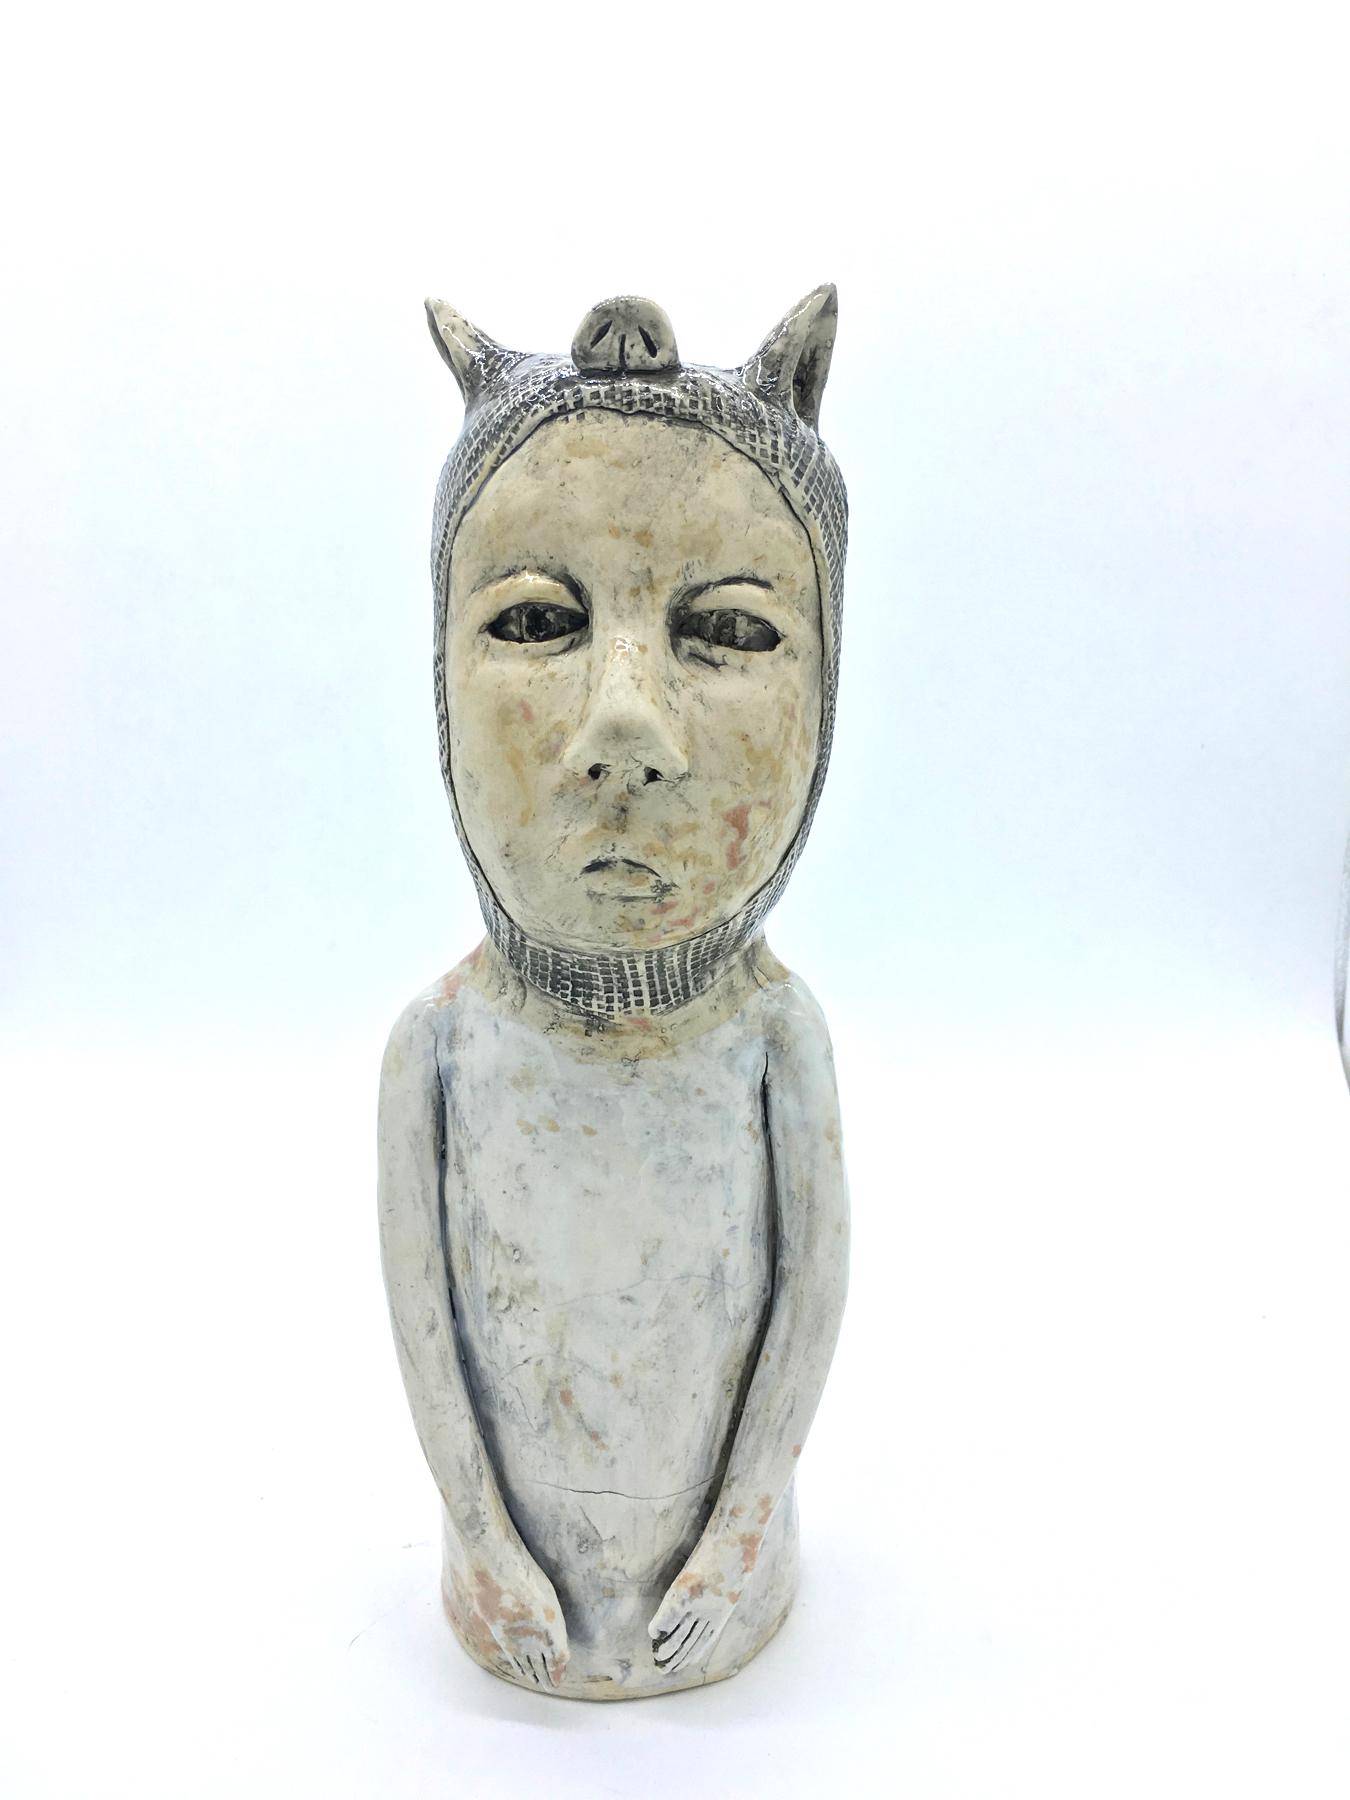 Ashley Benton Figurative Sculpture - Figurative ceramic sculpture: 'I just want to be with my people'